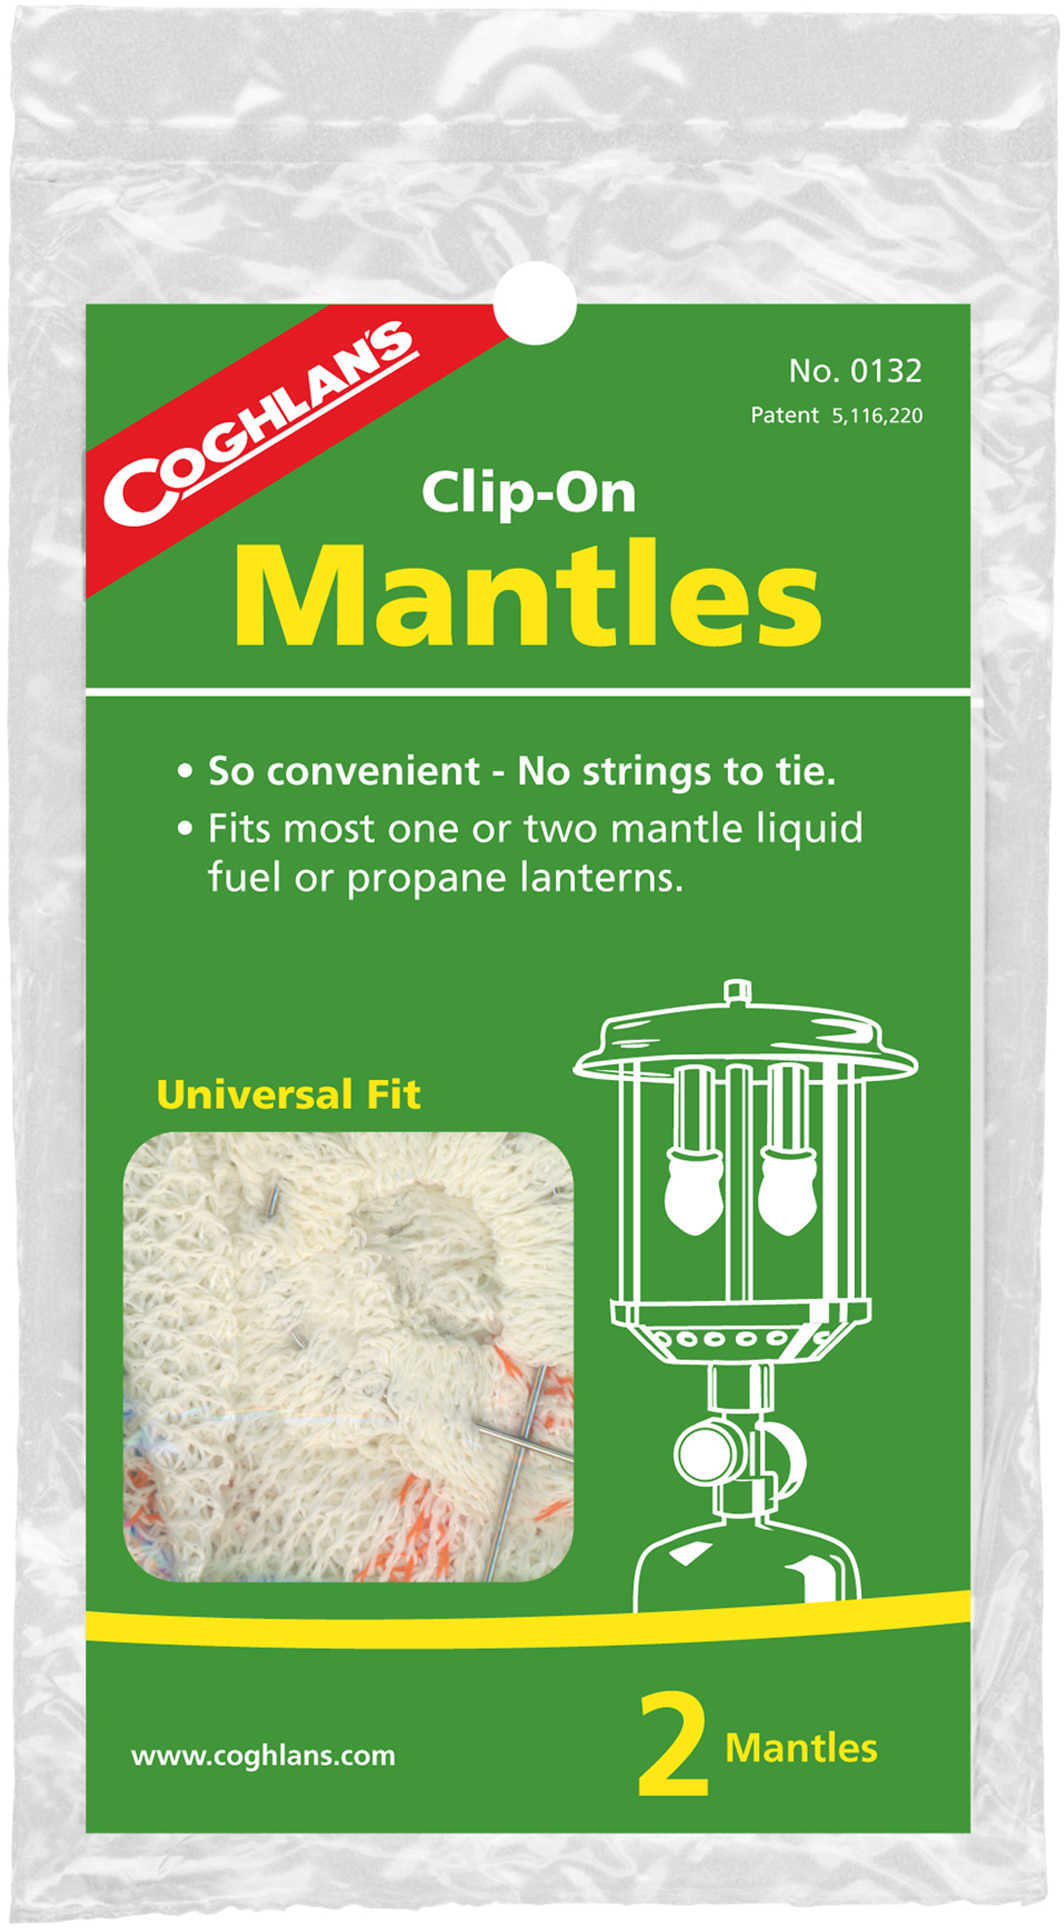 Coghlans Mantle Replacements Clip-On, Package of 2 0132